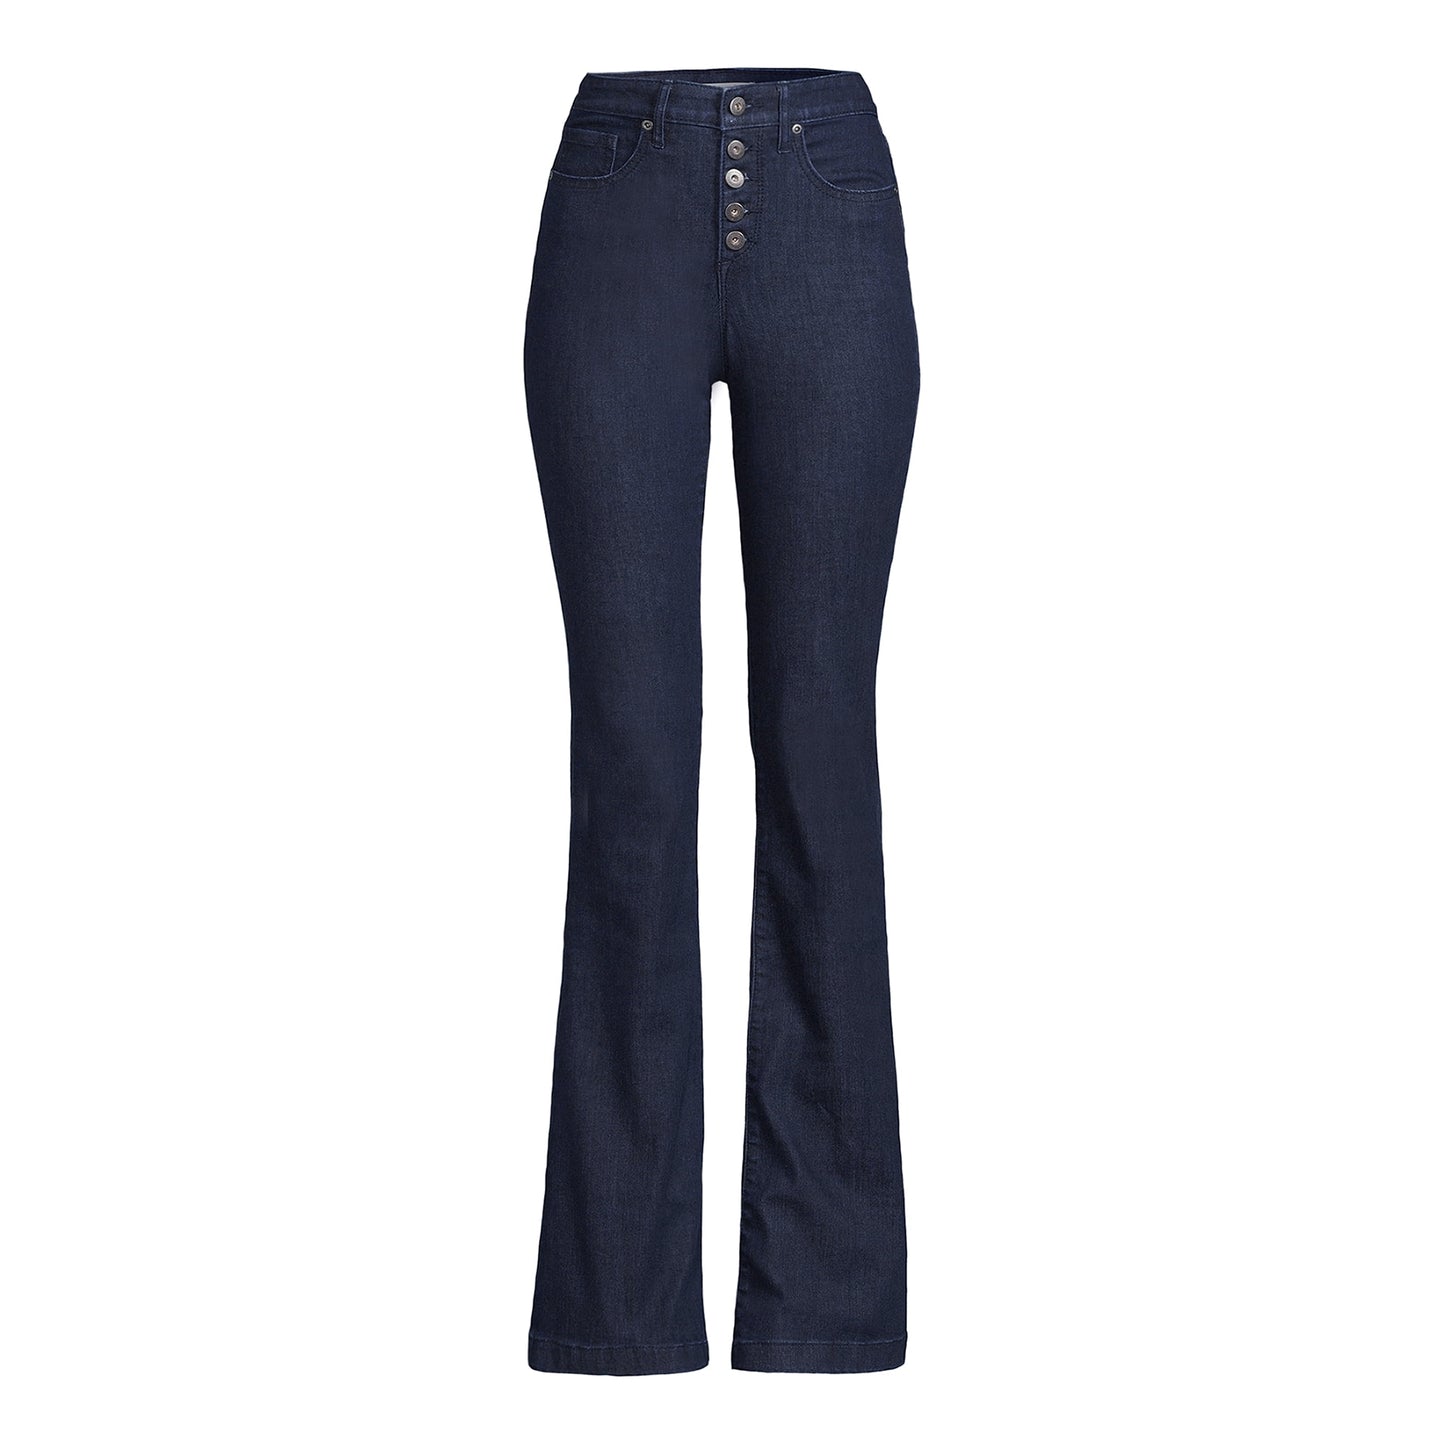 Sofia Jeans Women's Melisa Flare High Rise Jeans (5 Buttons)